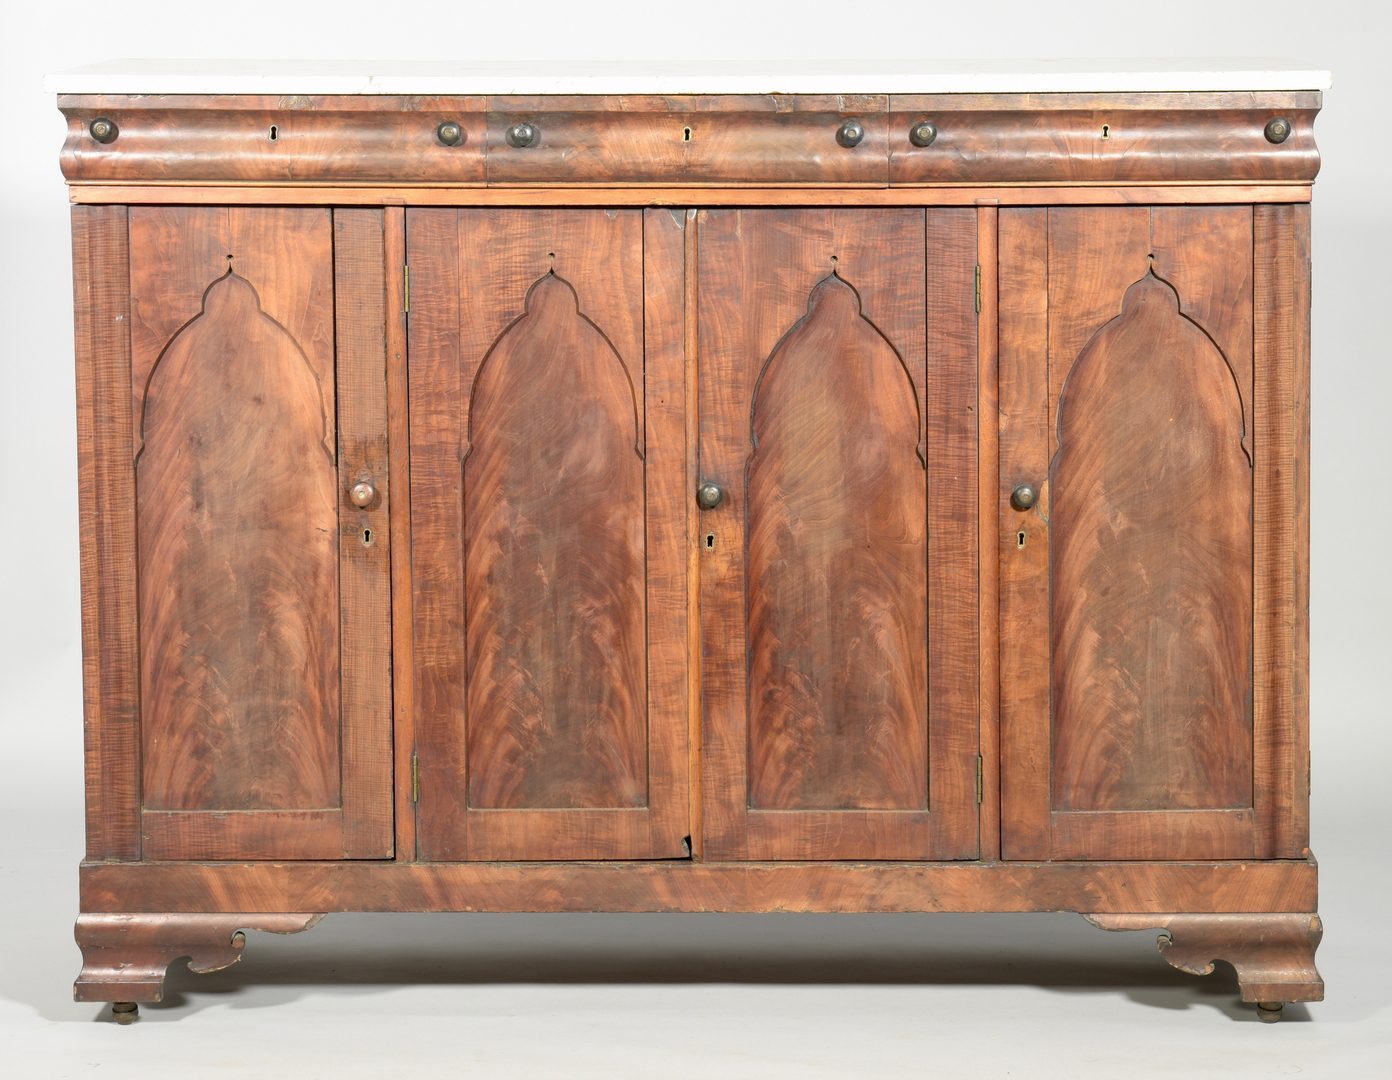 Lot 121: TN Gothic Revival Sideboard, Exhibited and Illustrated